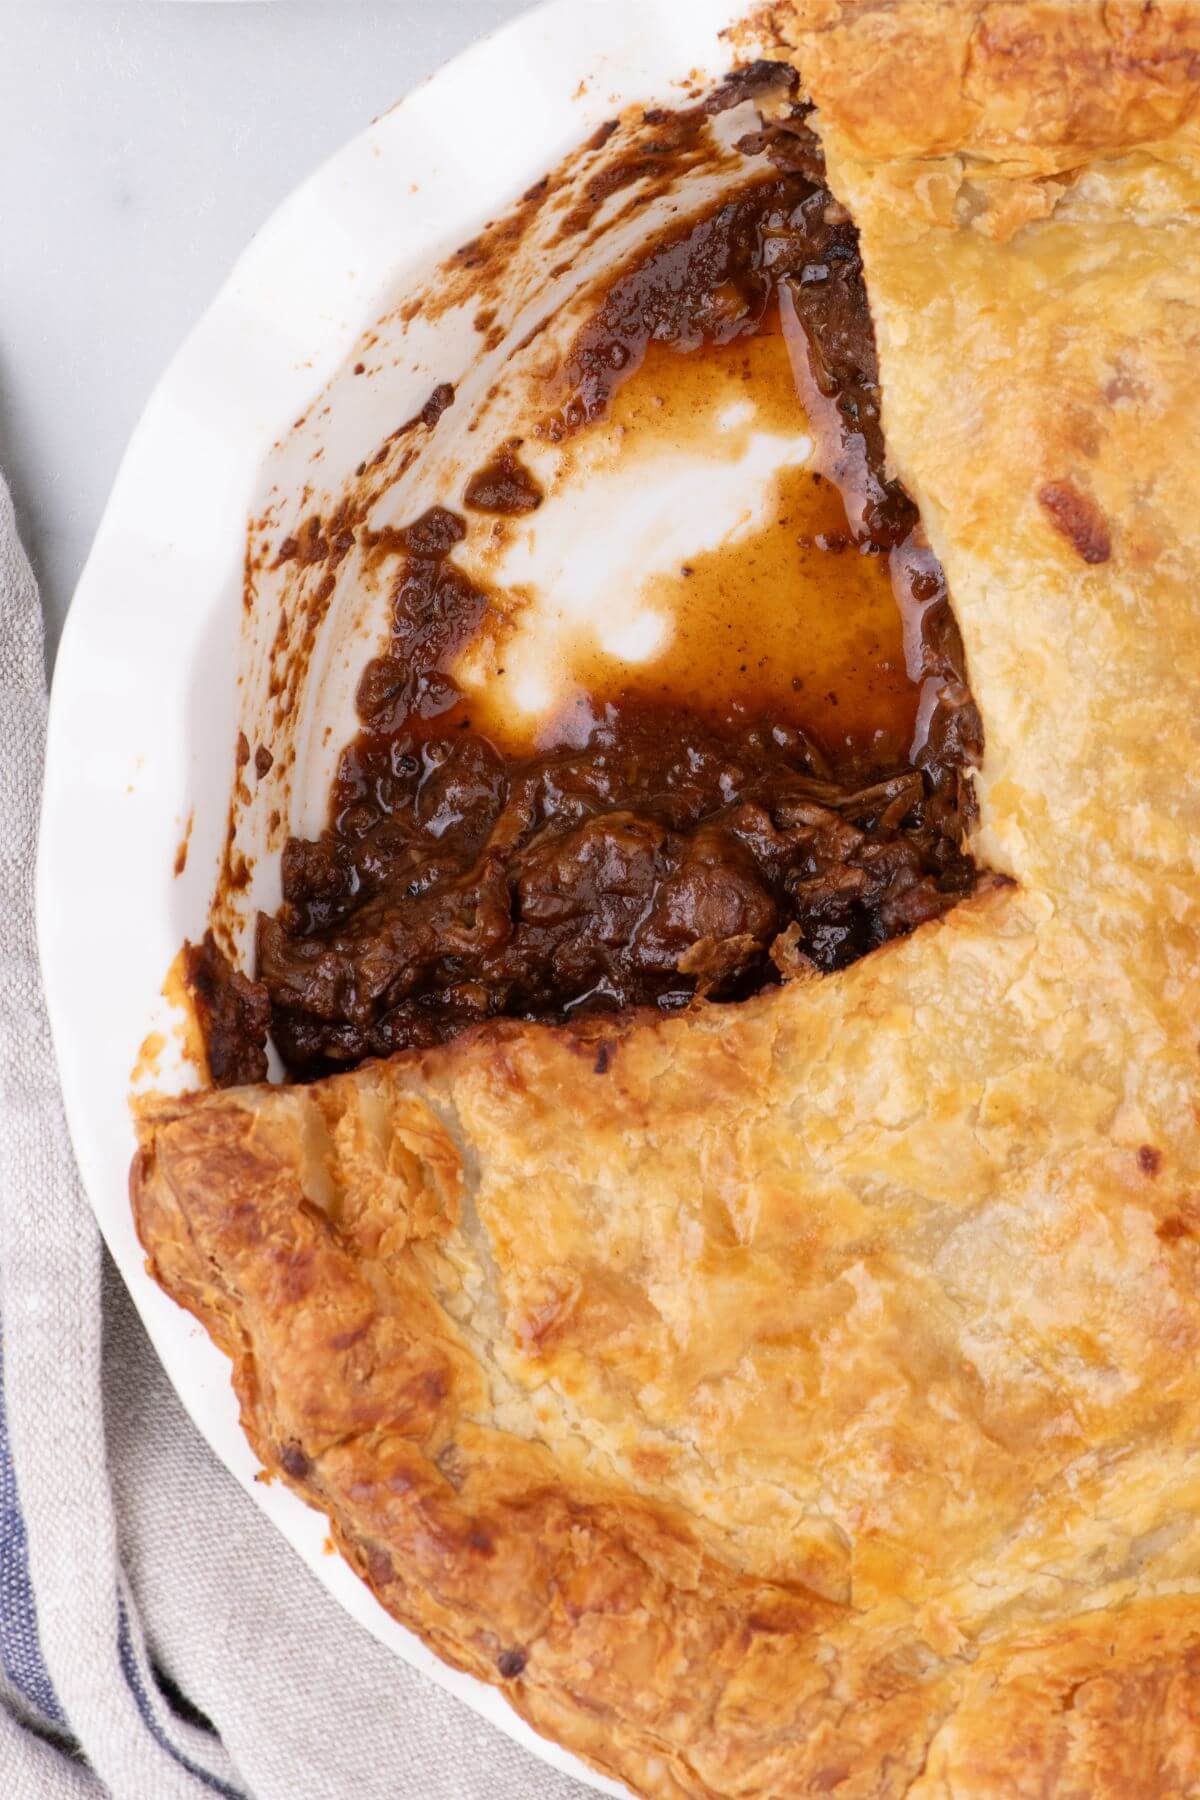 Irish steak and ale pie with beefy filling with gravy spilling out from under the puff pastry crust in a pie plate. 